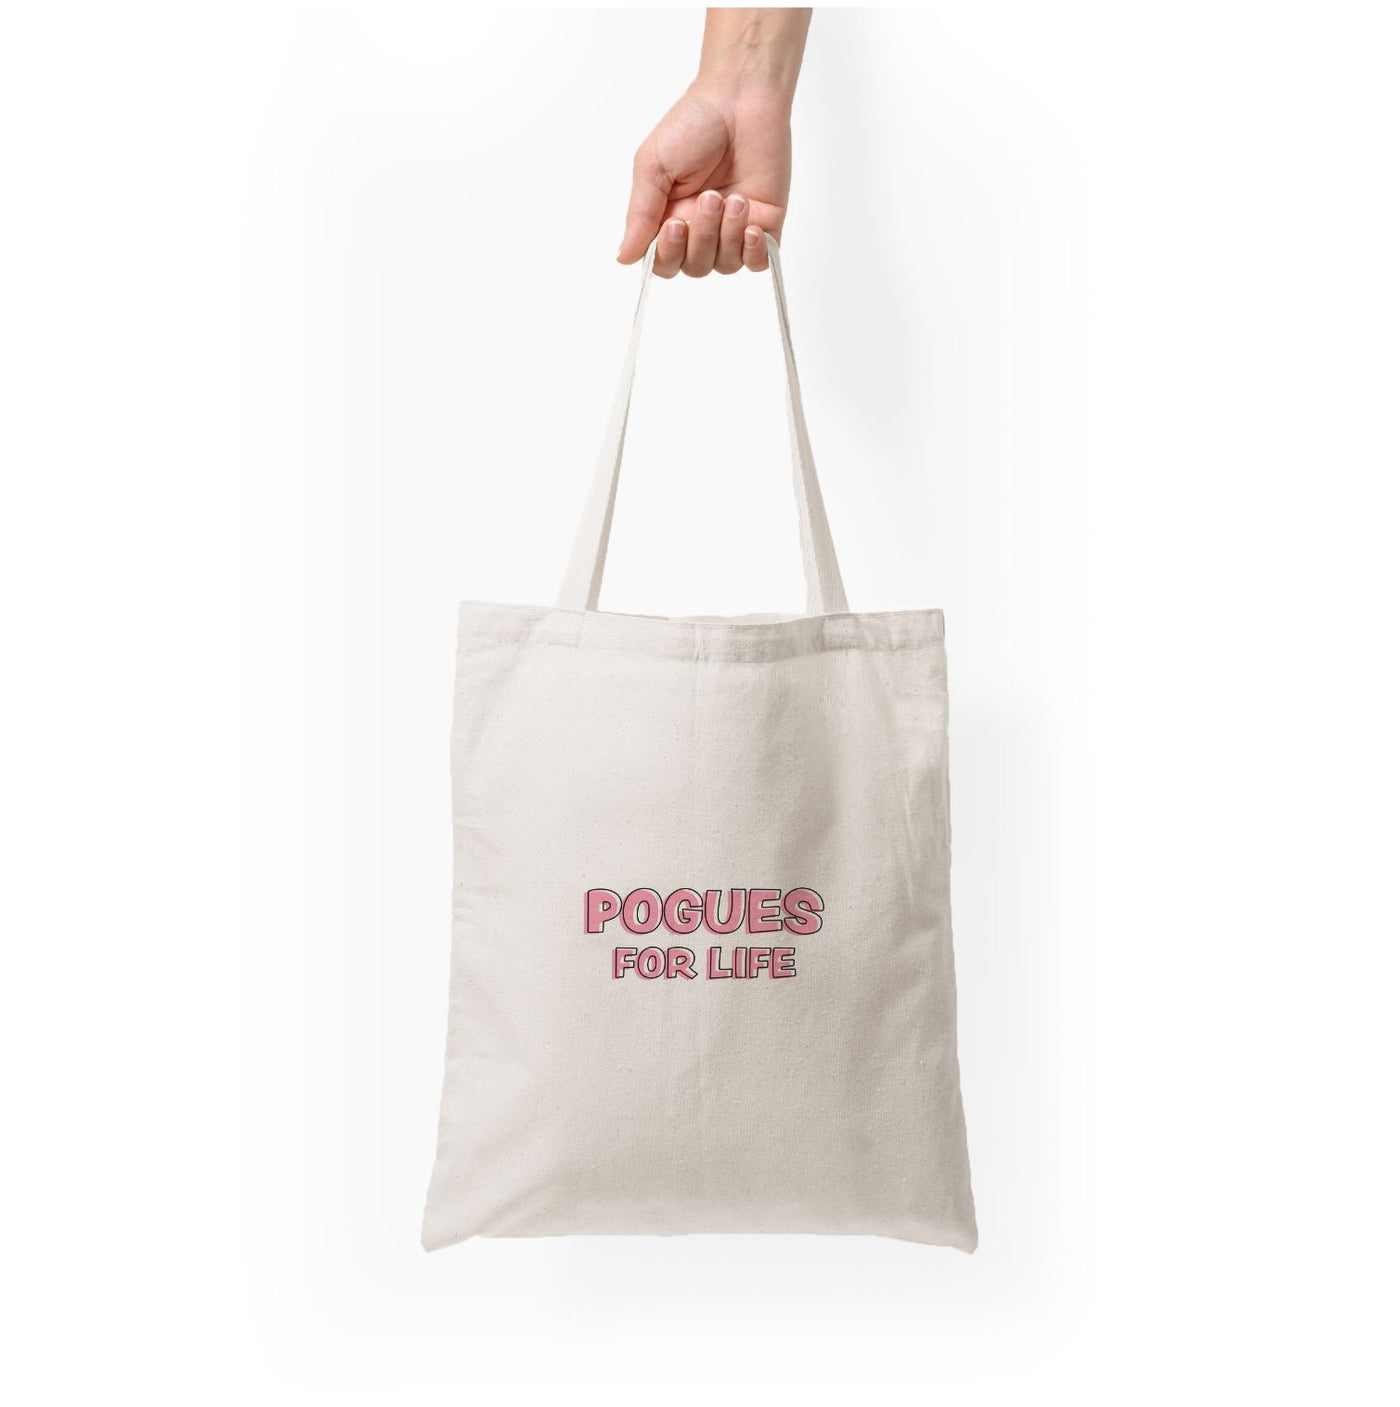 Pogues For Life - Outer Banks Tote Bag